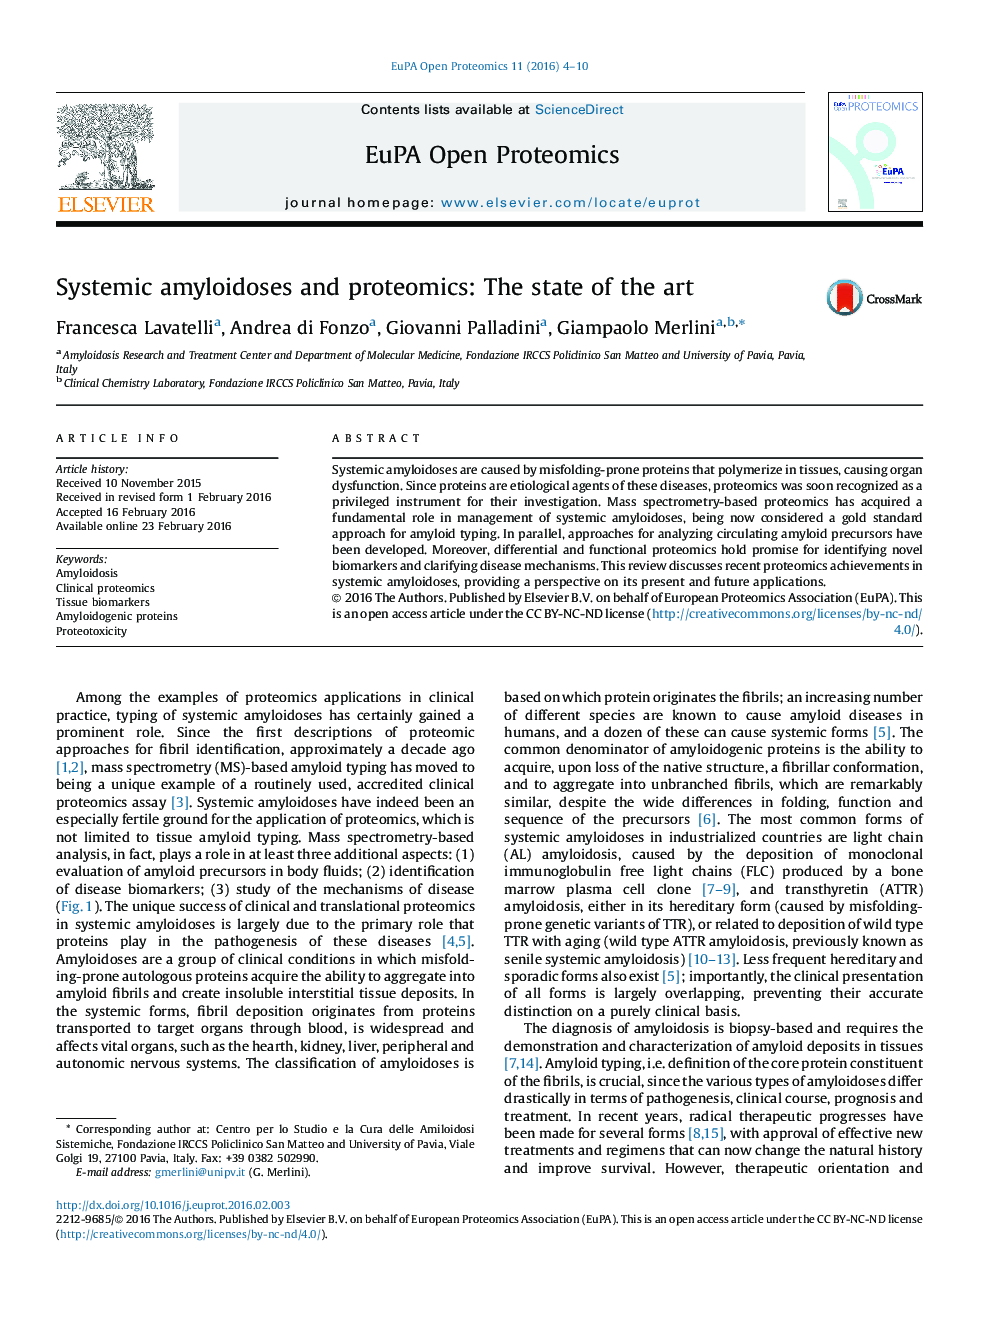 Systemic amyloidoses and proteomics: The state of the art